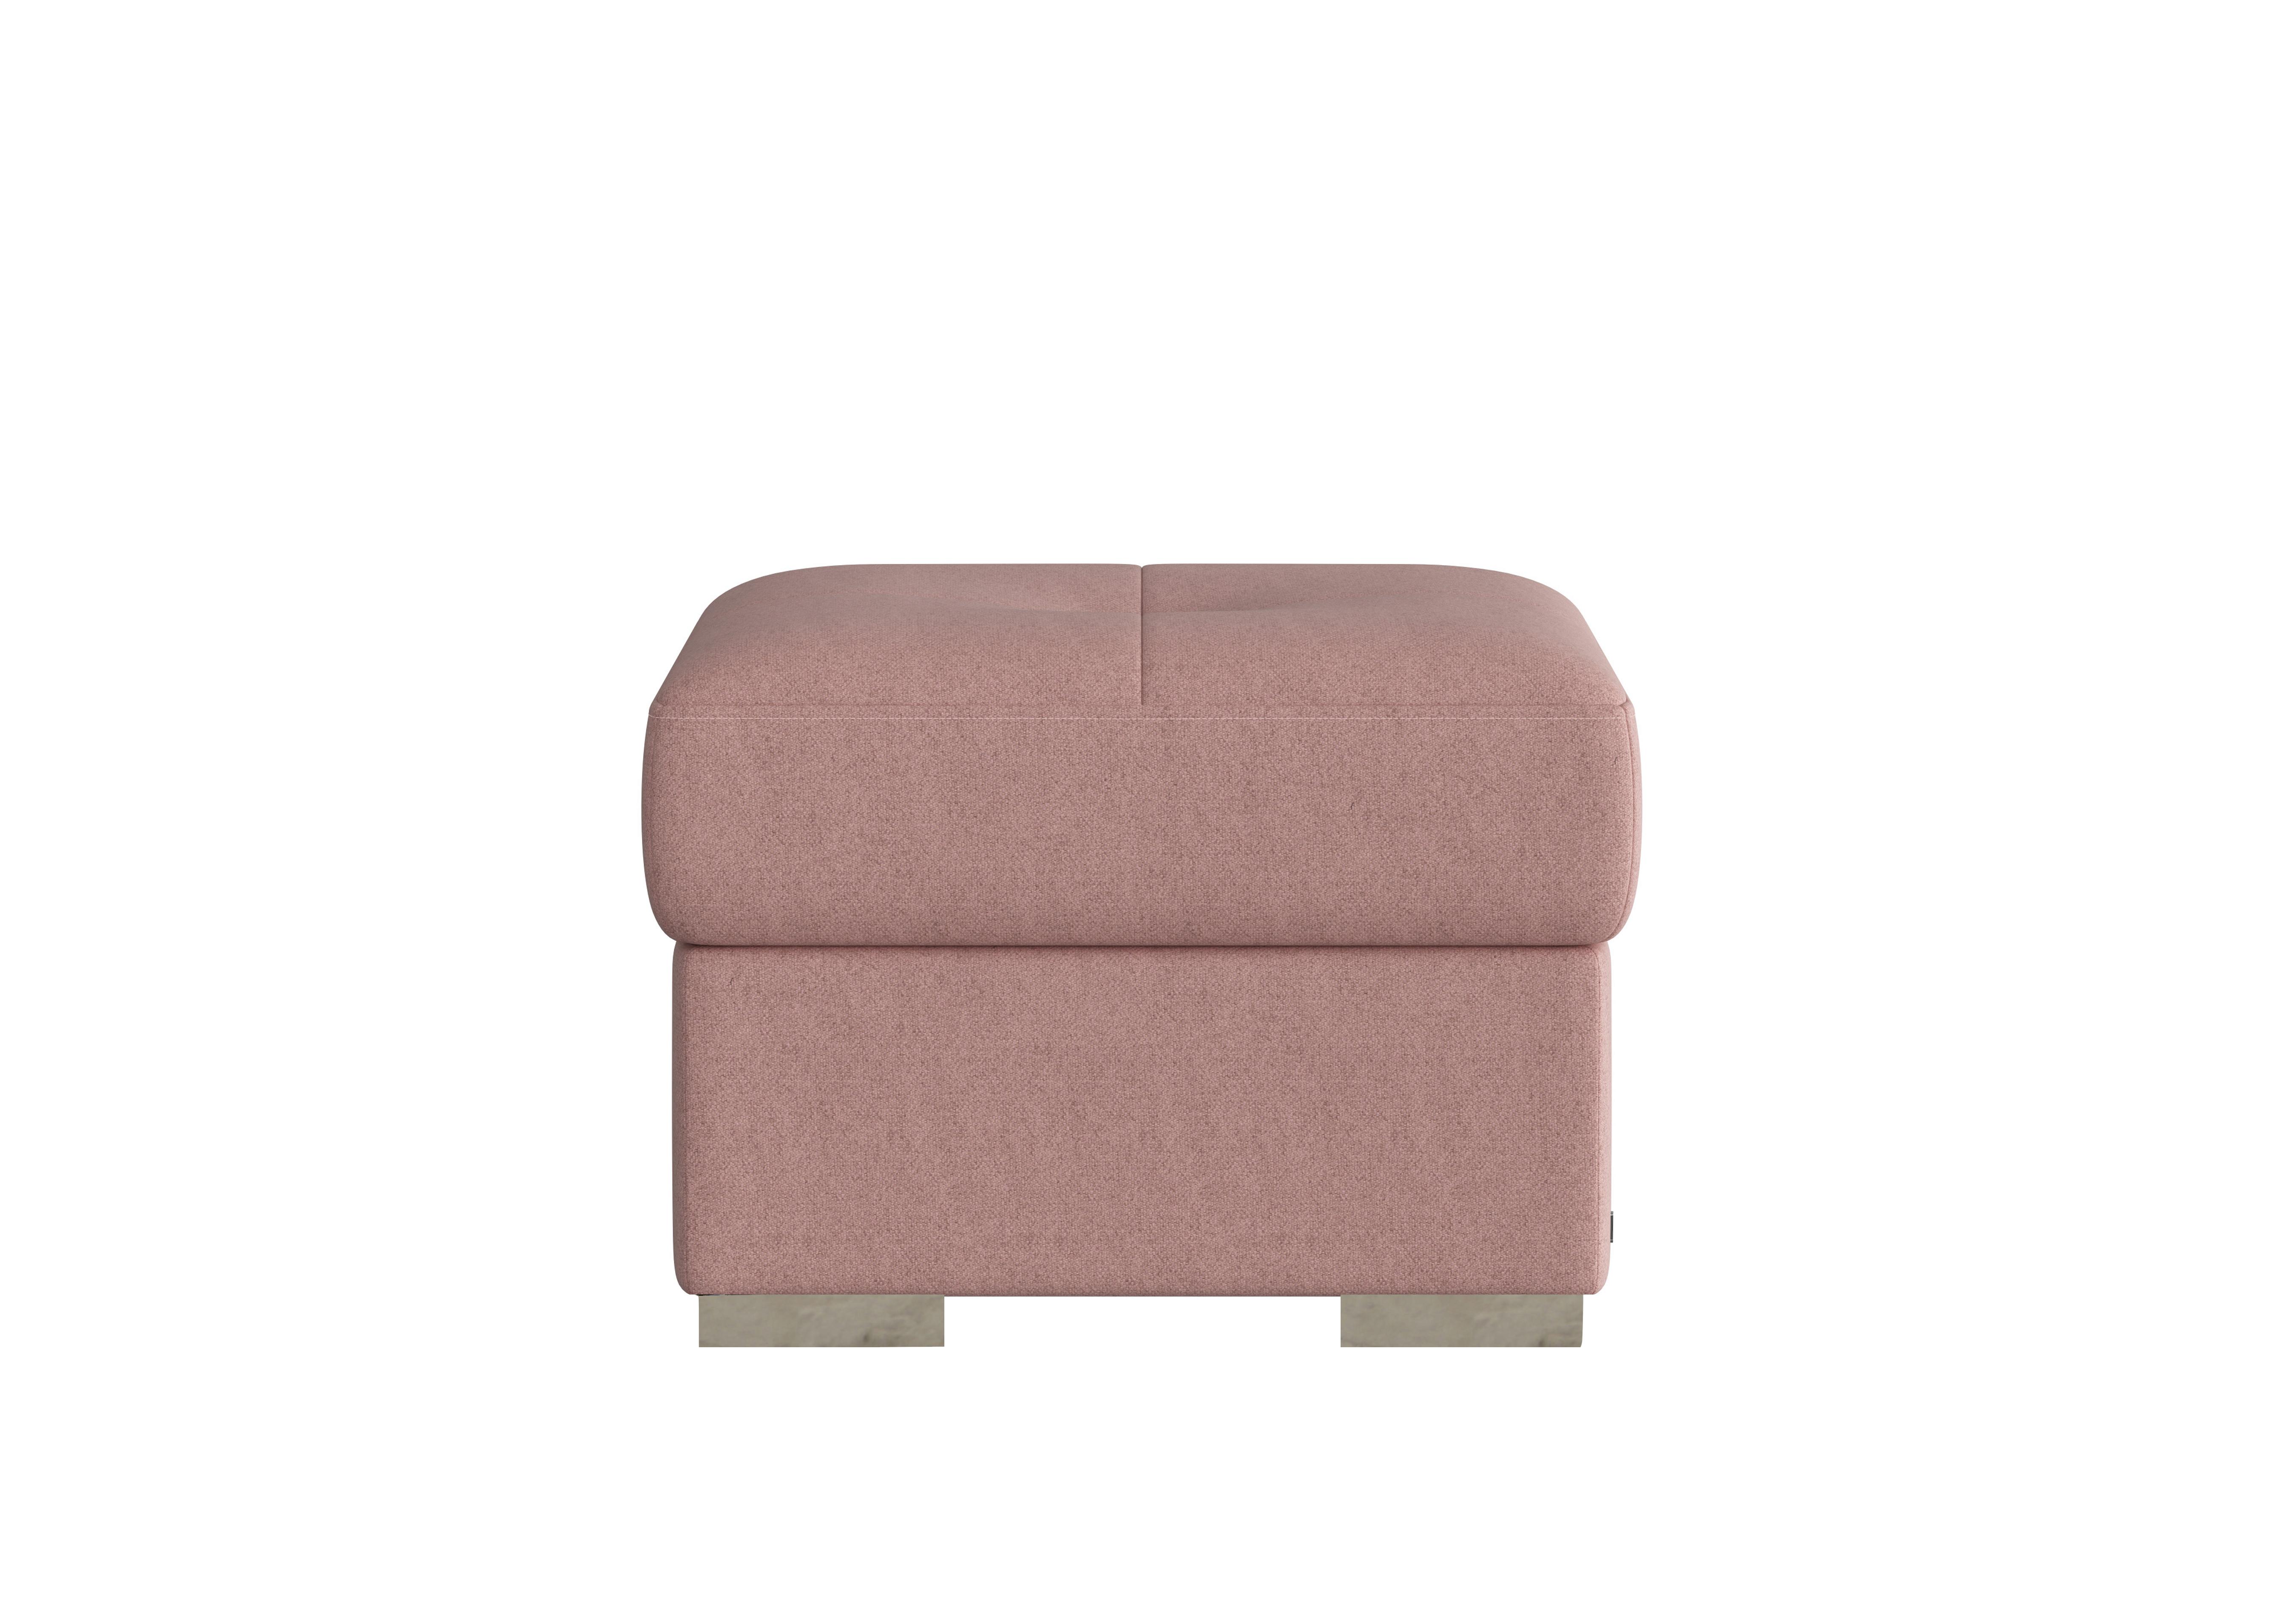 Galileo Fabric Storage Footstool in Fuente Coral Ch on Furniture Village